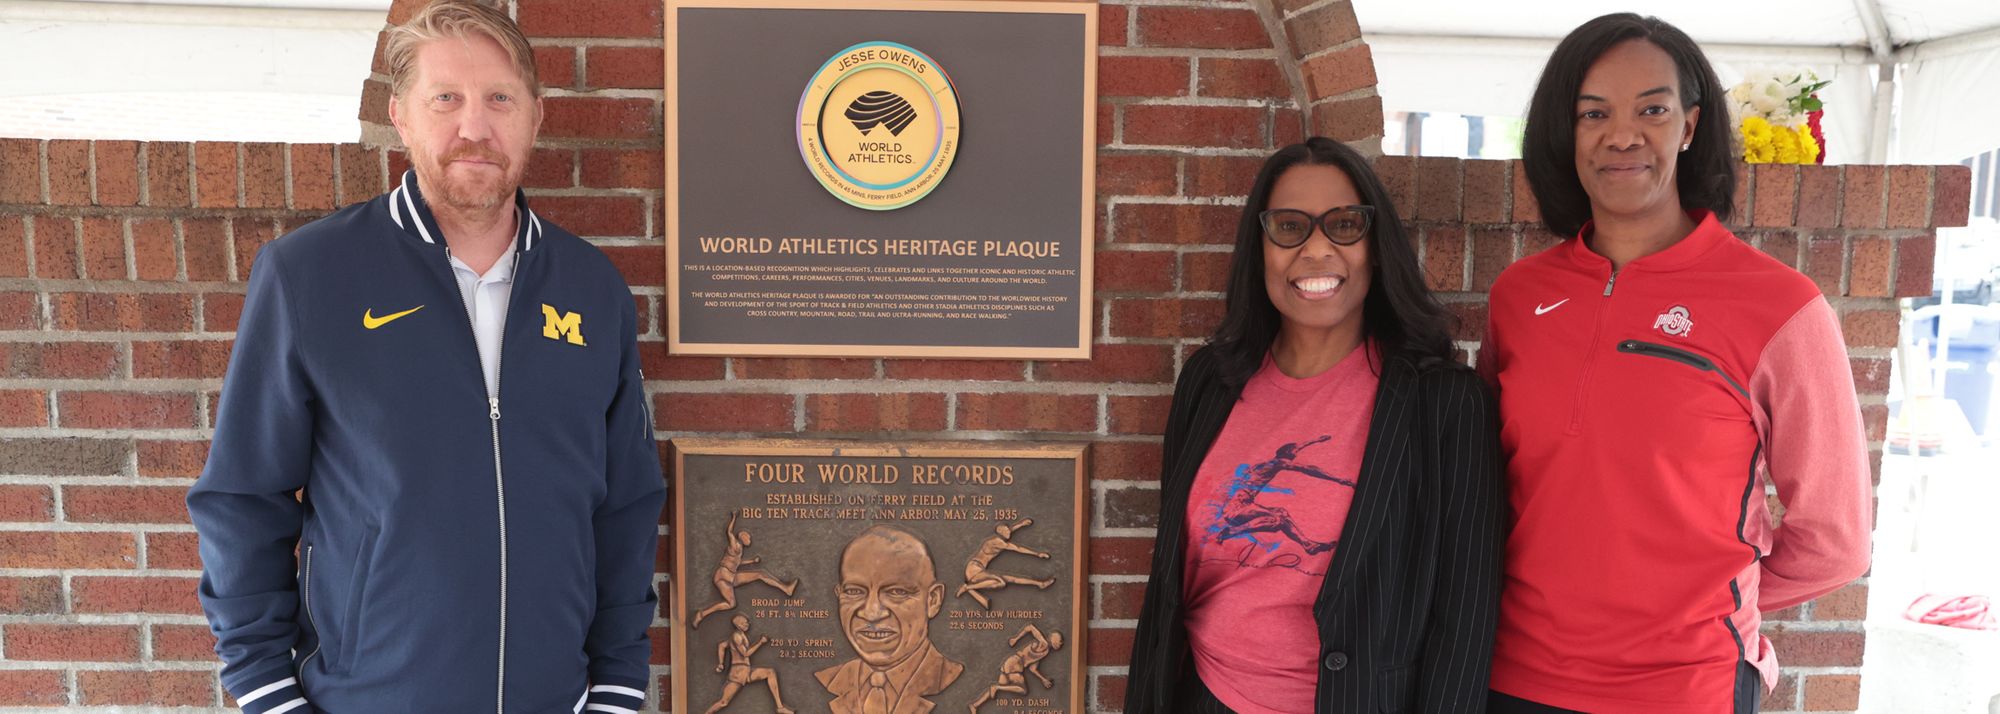 The World Athletics Heritage Plaque honouring Jesse Owens’ Day of Days at Ferry Field was unveiled by Owens’ granddaughter Marlene Dortch and Michigan’s Athletic Director Warde Manuel on Thursday (9)